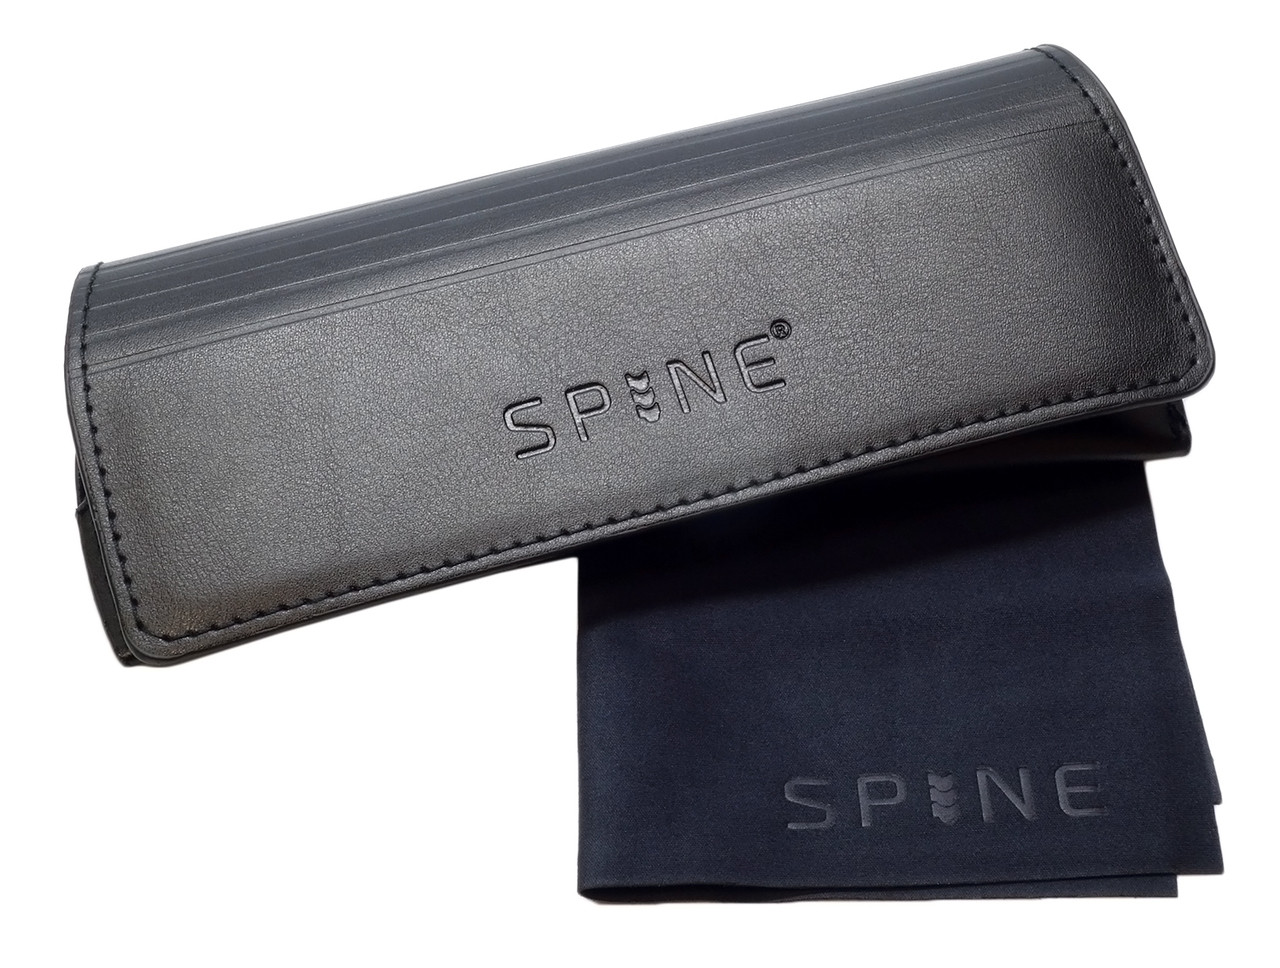 Included Spine Optics Carrying Case